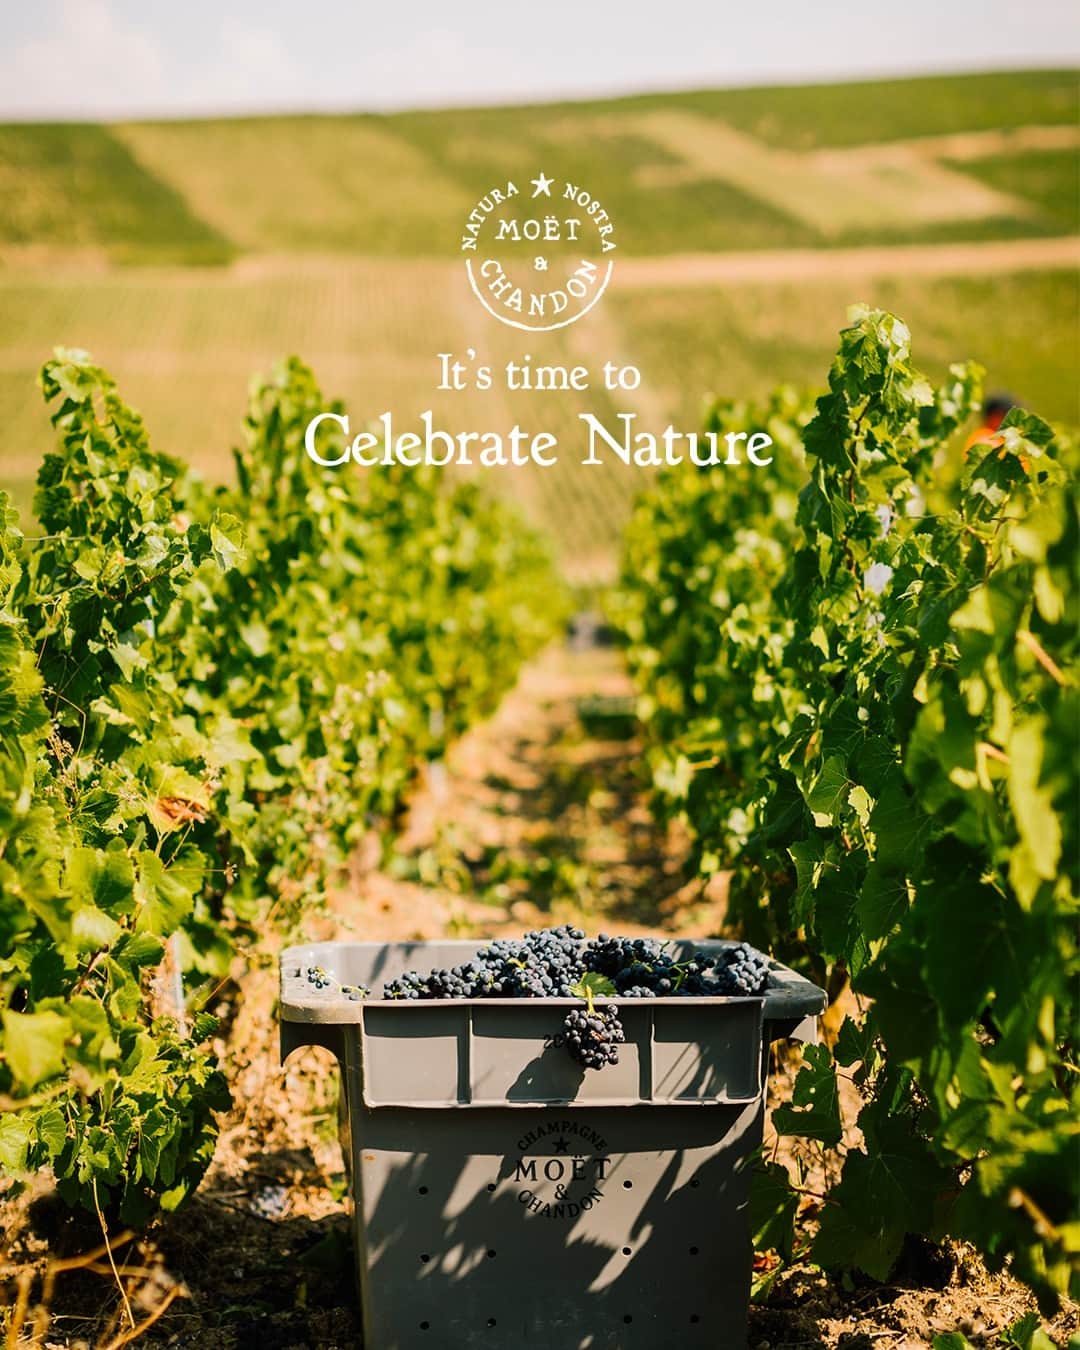 Moët & Chandon Officialのインスタグラム：「Celebrating nature. Each year, the entire Champagne region is fully engaged around the harvest. At Moët & Chandon, we are passionate about this magical time, and driven by the desire to do our best to write the next chapter of our story, hand in hand with the terroir and our grower partners. ⁣ ⁣ #NaturaNostra #MoetChandon⁣ ⁣ This material is not intended to be viewed by persons under the legal alcohol drinking age or in countries with restrictions on advertising on alcoholic beverages. ENJOY MOËT RESPONSIBLY.⁣」